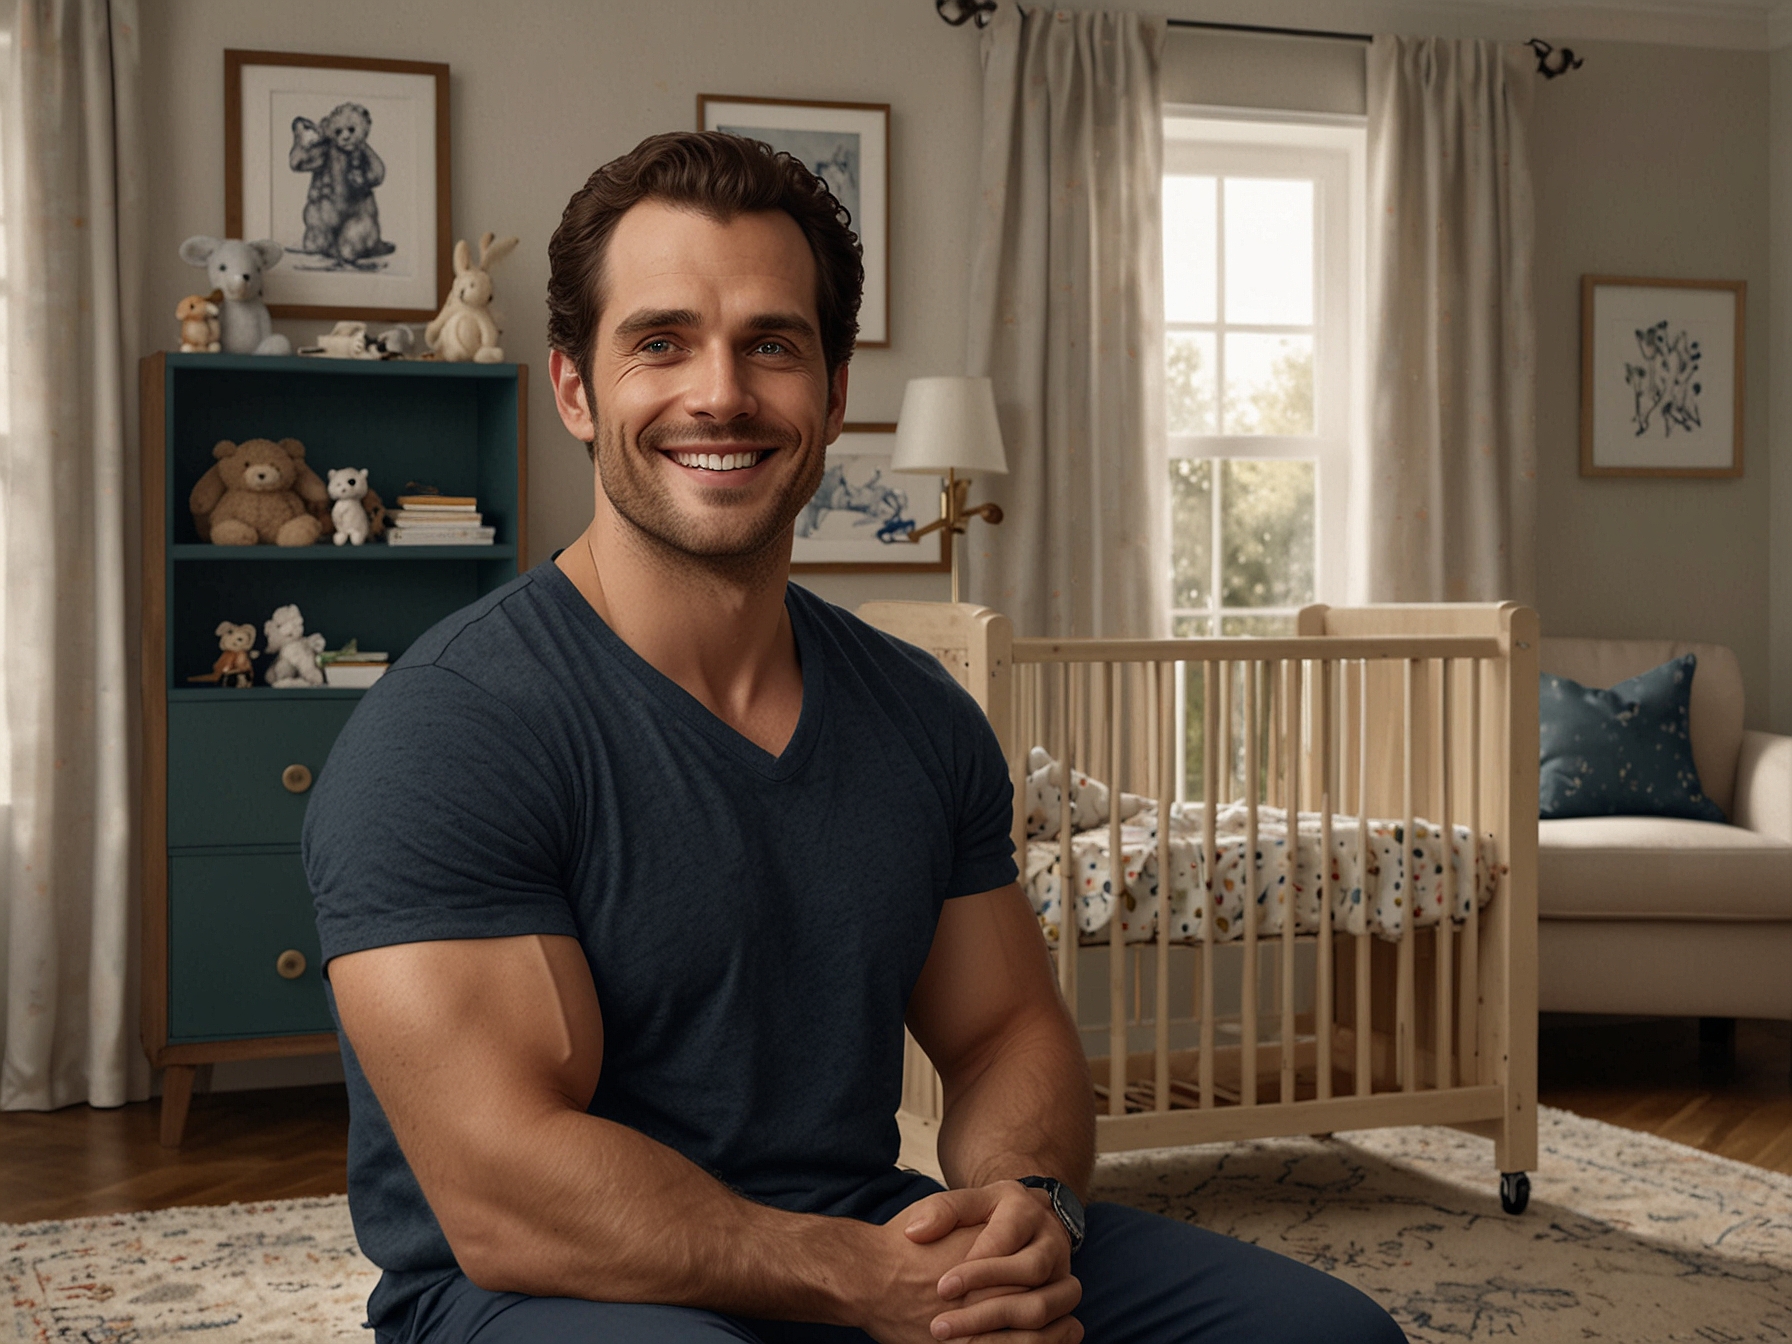 Henry Cavill smiles warmly as he sits in a cozy, meticulously decorated nursery, showcasing a beautiful crib and baby essentials, symbolizing his anticipation for fatherhood.